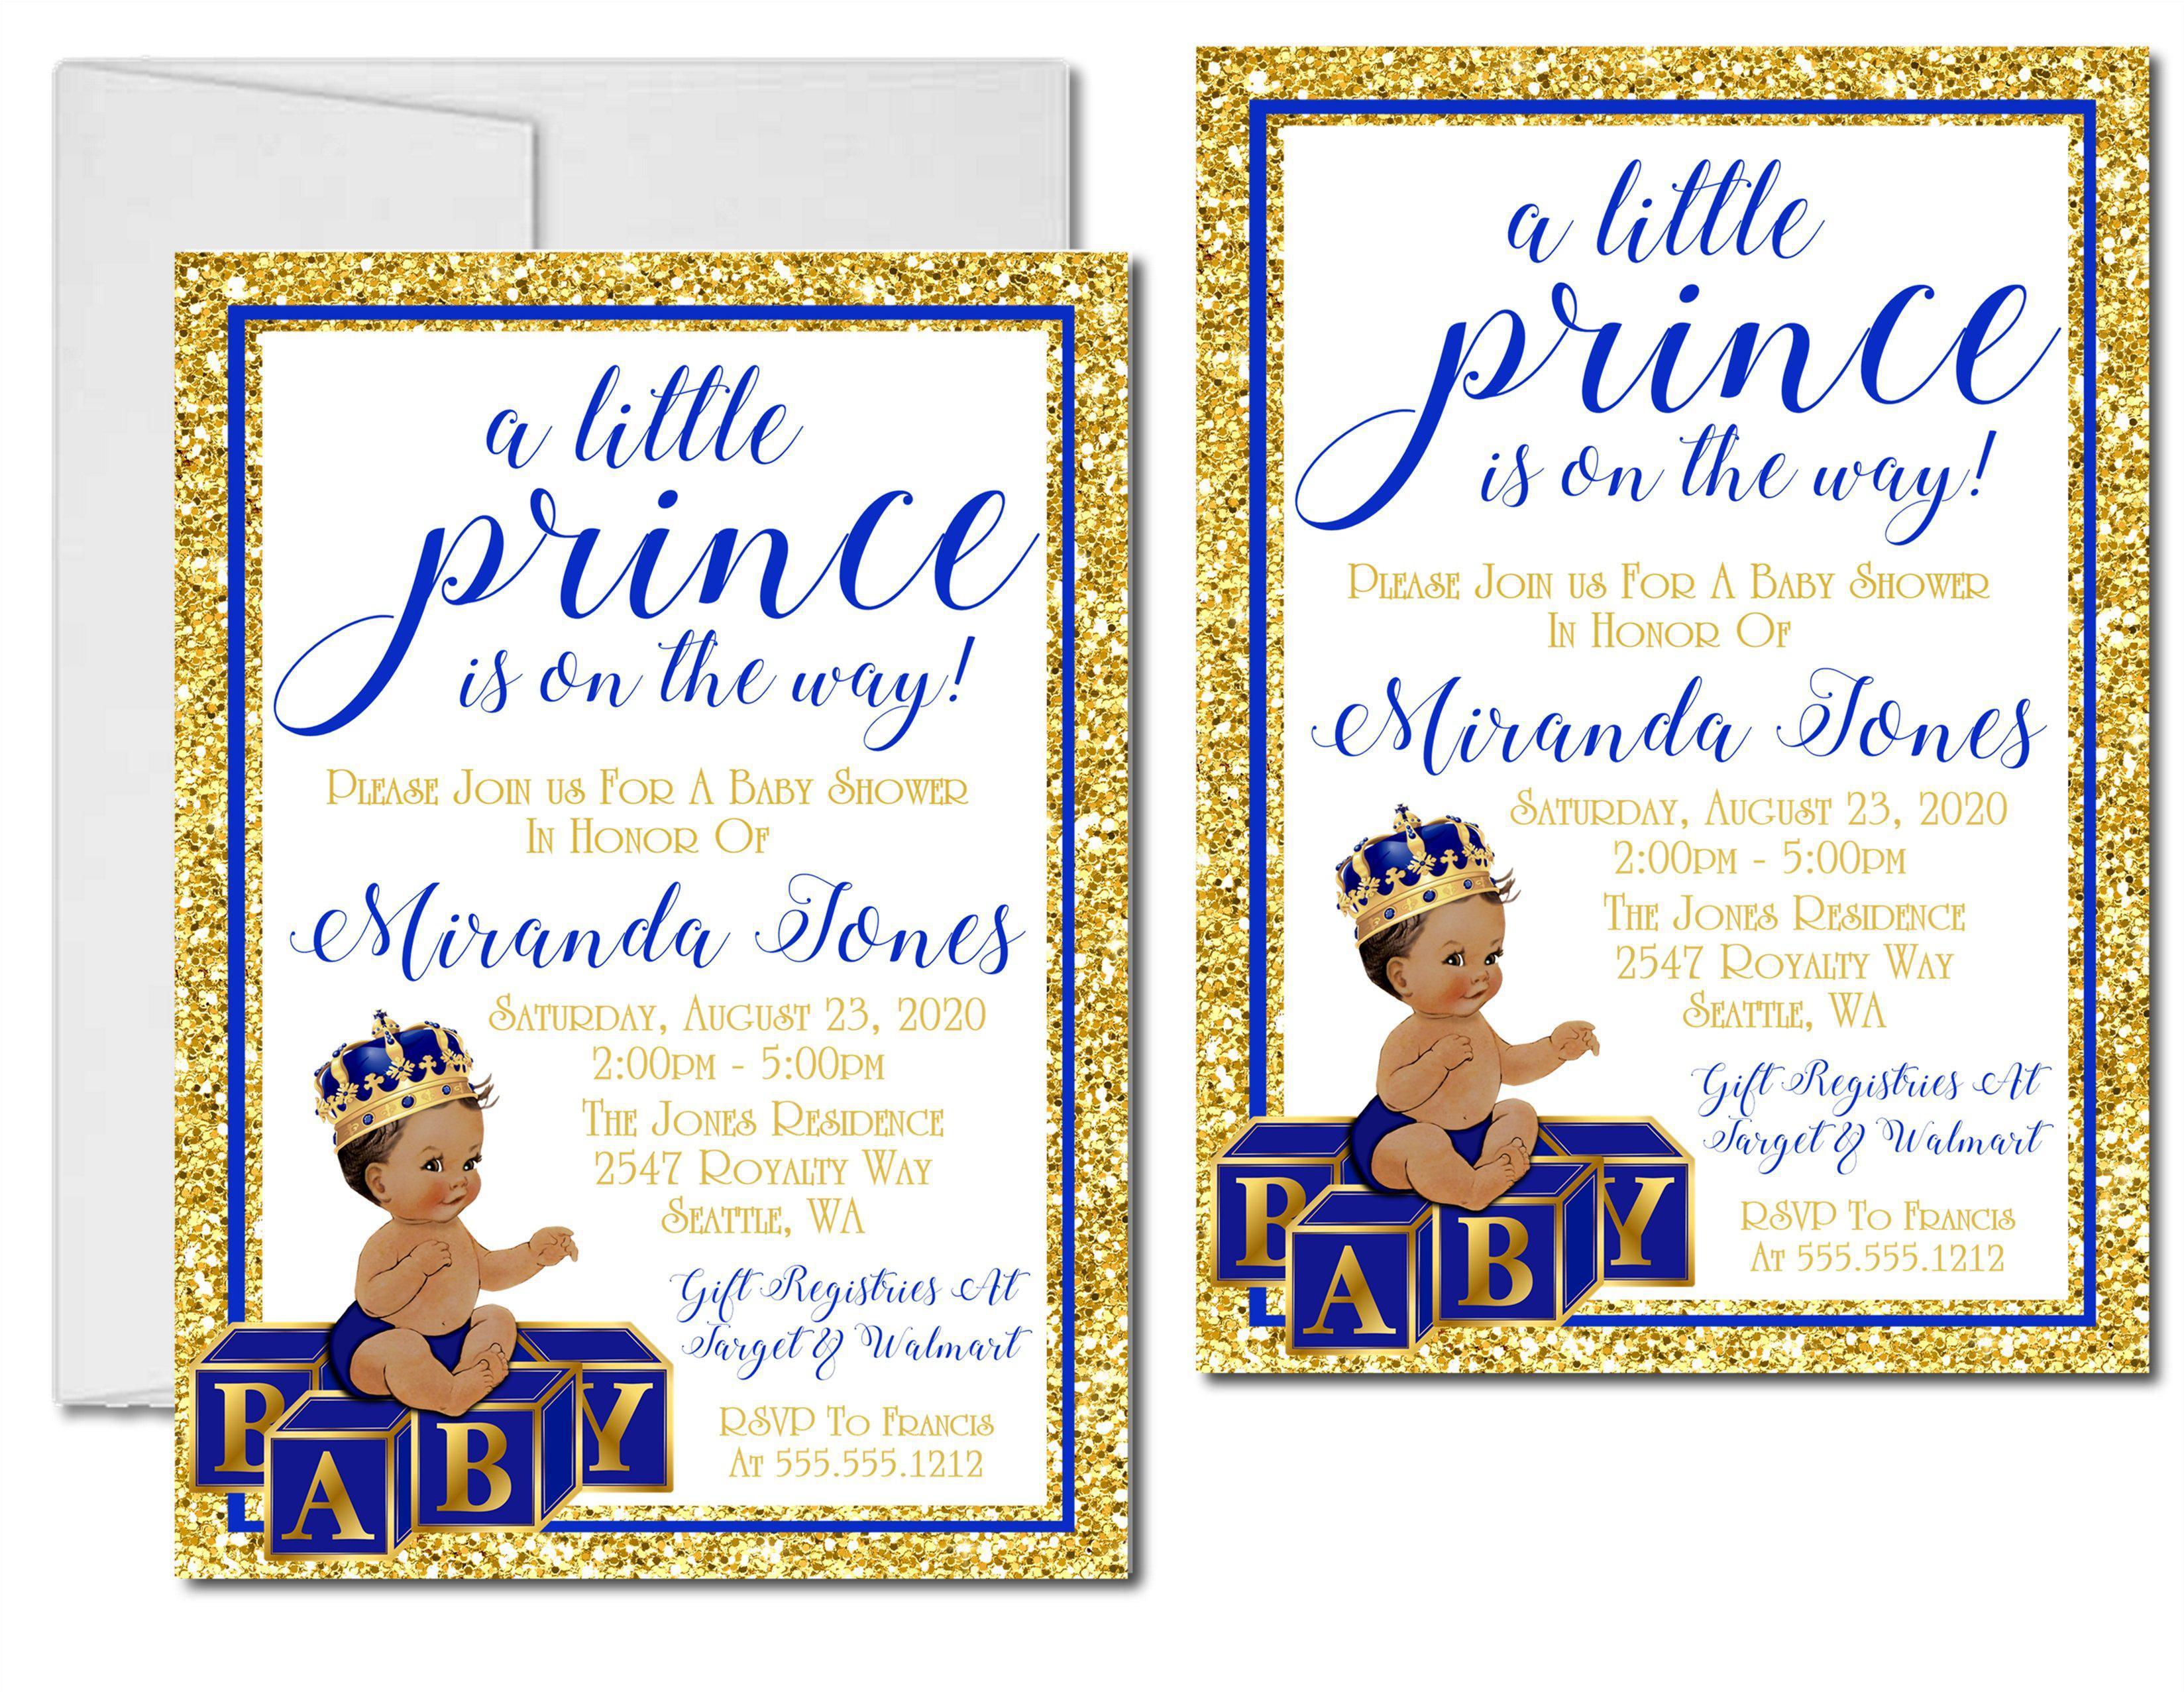 Prince Baby Shower Invitations